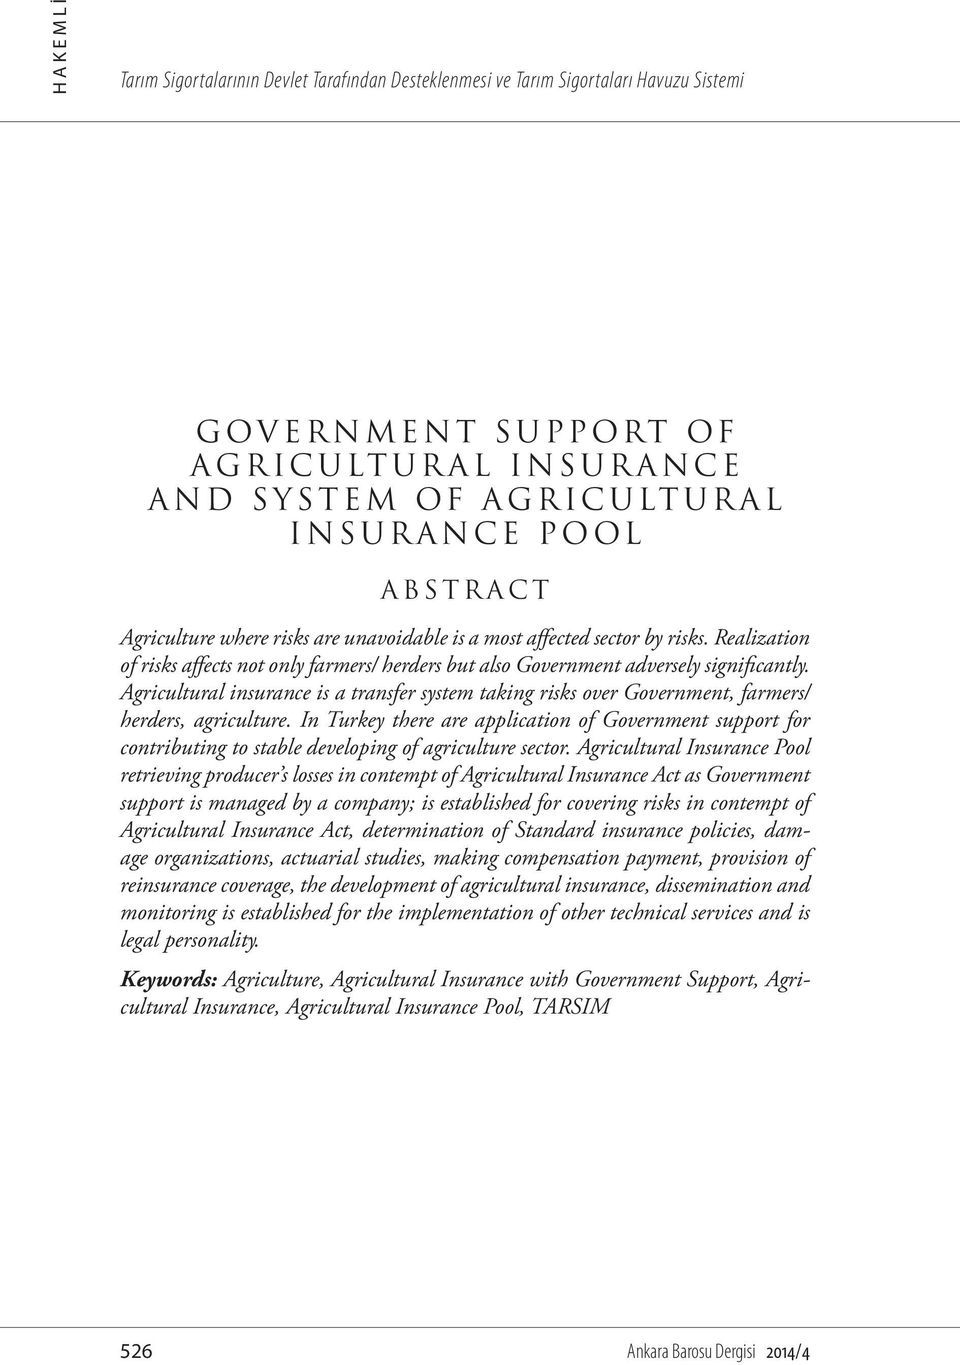 Agricultural insurance is a transfer system taking risks over Government, farmers/ herders, agriculture.